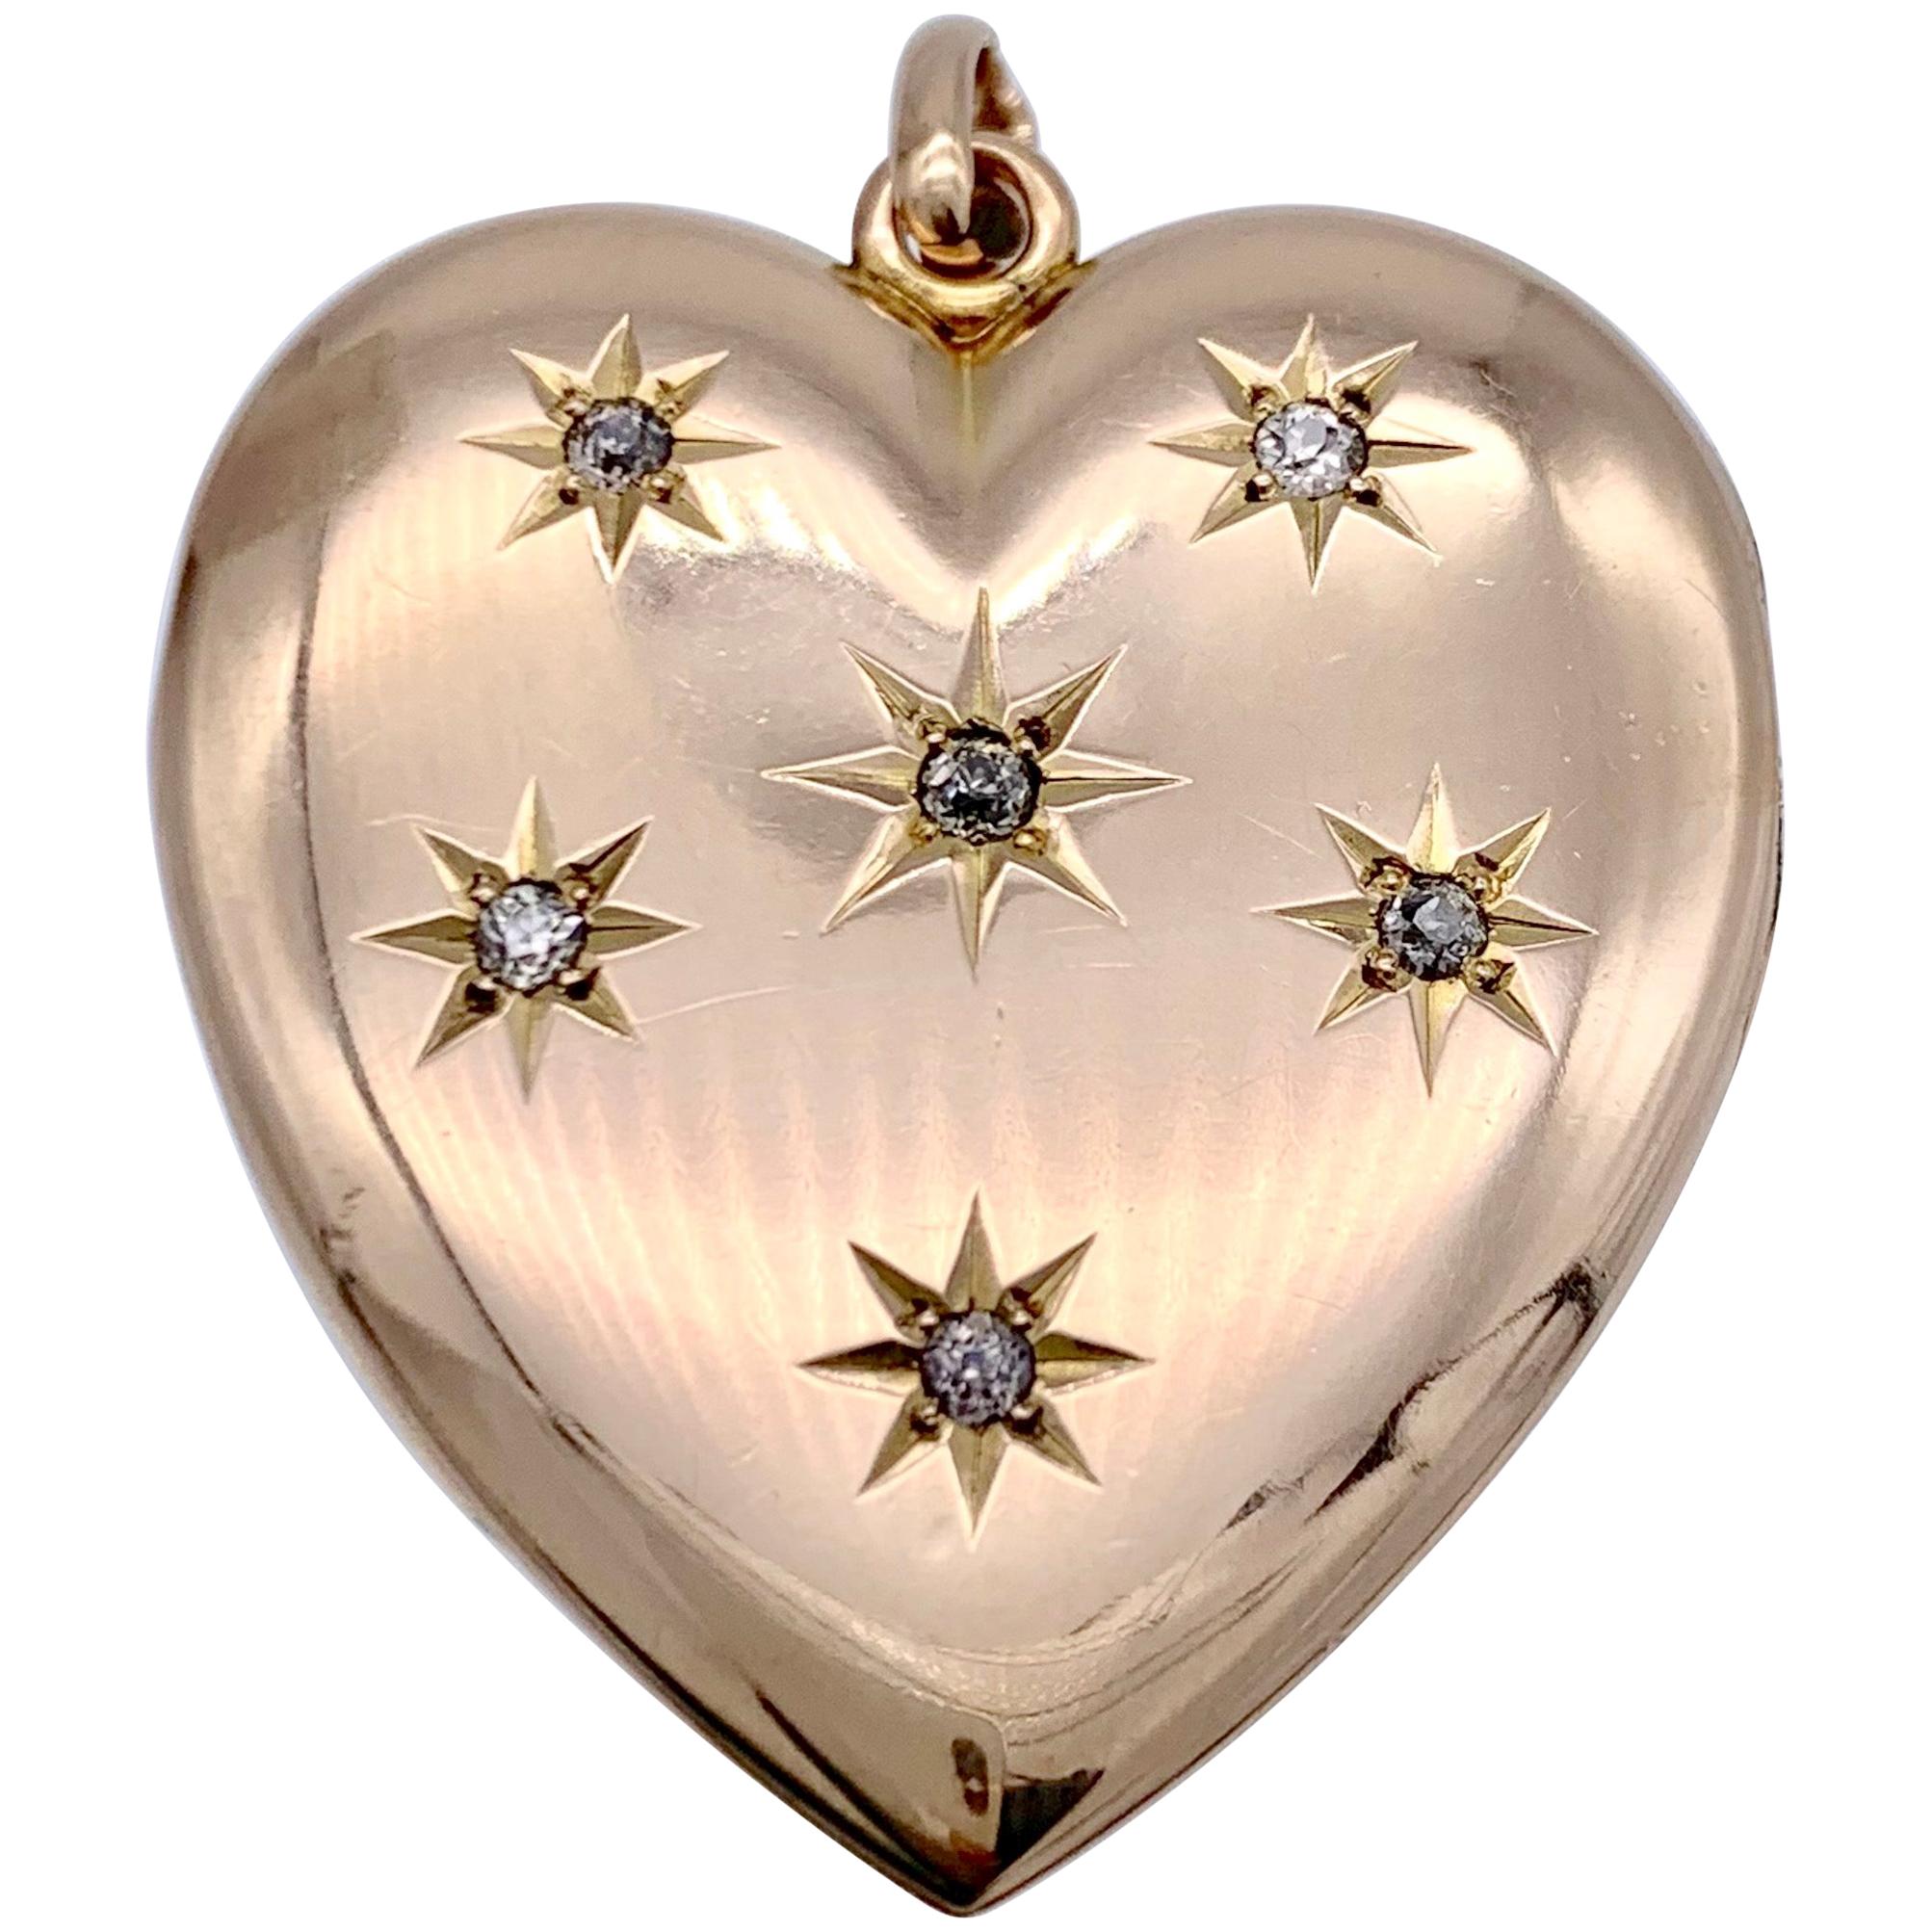 This elegant 14 karat rose gold locket in the shape of a heart is set with six diamonds in star shaped settings. The reverse is beautifully engraved with the initials H and M.